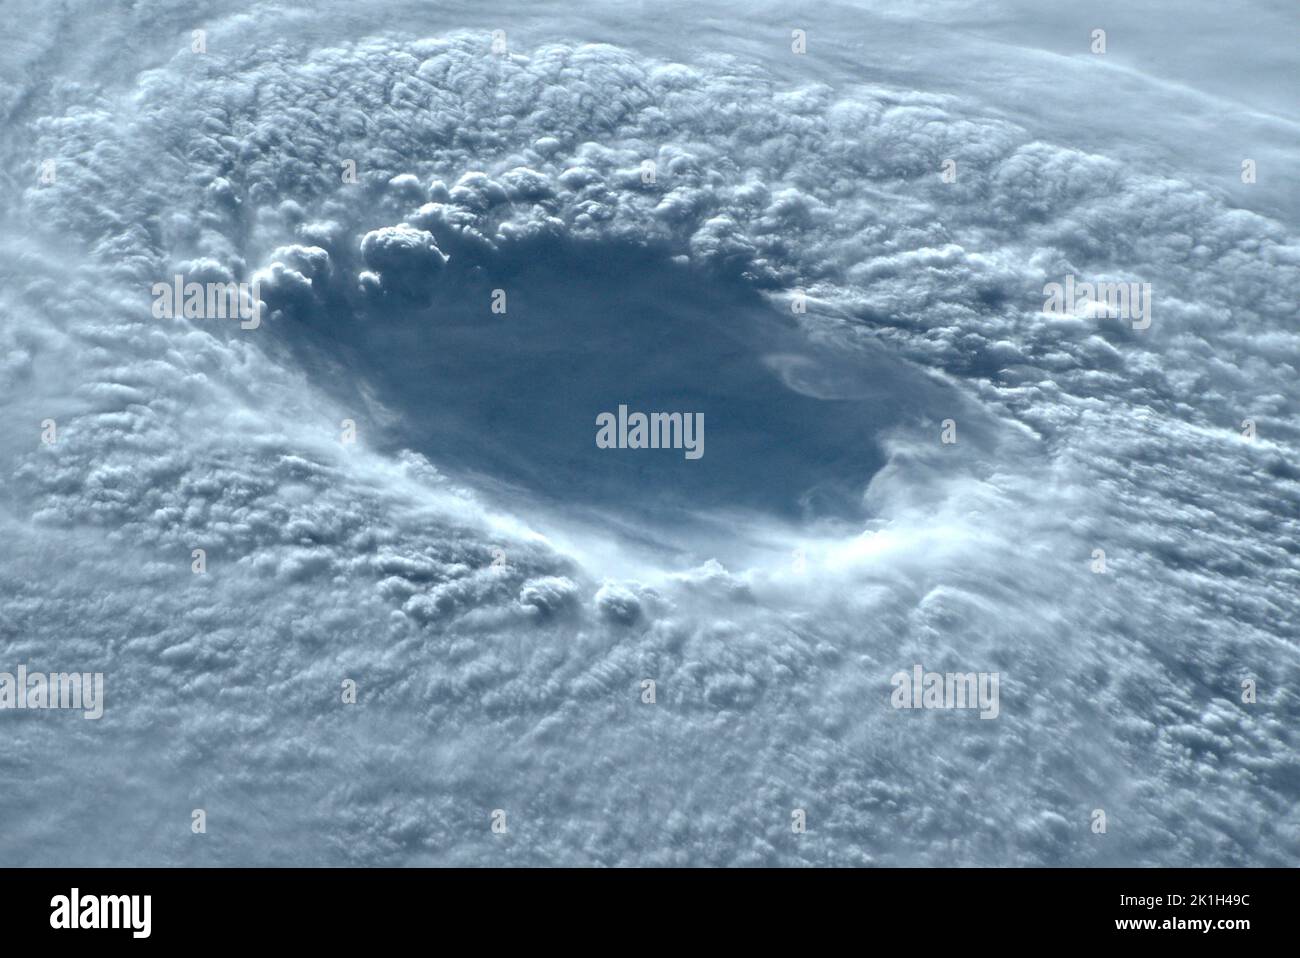 International Space Station, EARTH ORBIT. 17 September, 2022. View of eye wall of Typhoon Nanmadol as it prepares to make landfall in south-western Japan seen from the International Space Station, September 17, 2022 in Earth Orbit. The storm is packing gusts up to 150mph and record amounts of rain.    Credit: Bob Hines/NASA/Alamy Live News Stock Photo